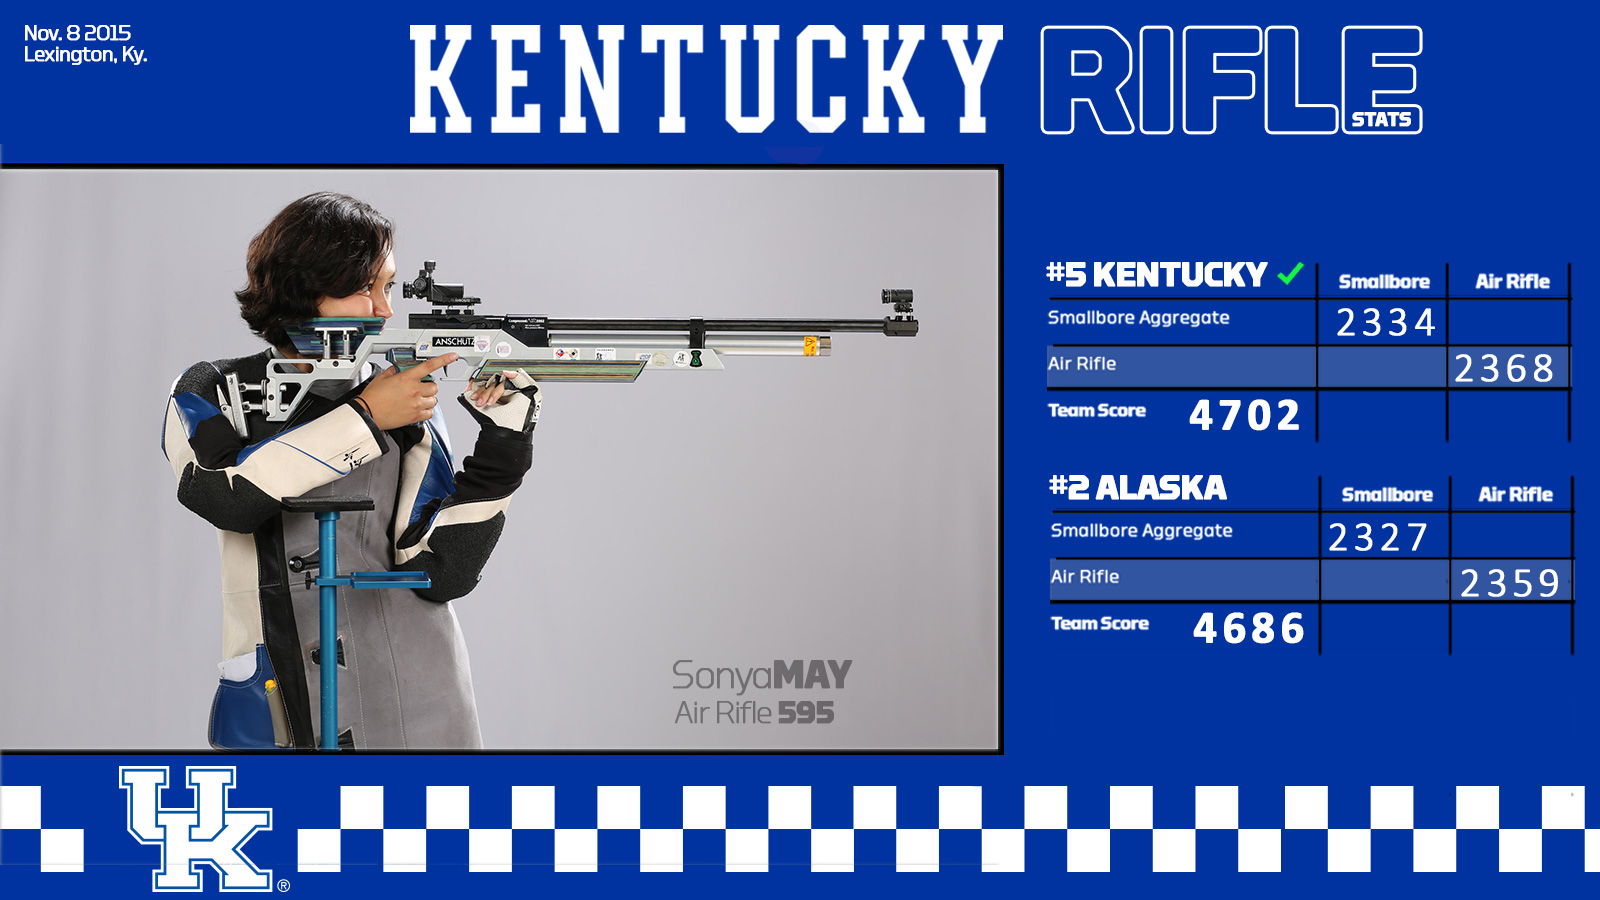 No. 5 UK Rifle Posts Second-Straight 4700+ in Win over No. 2 Alaska